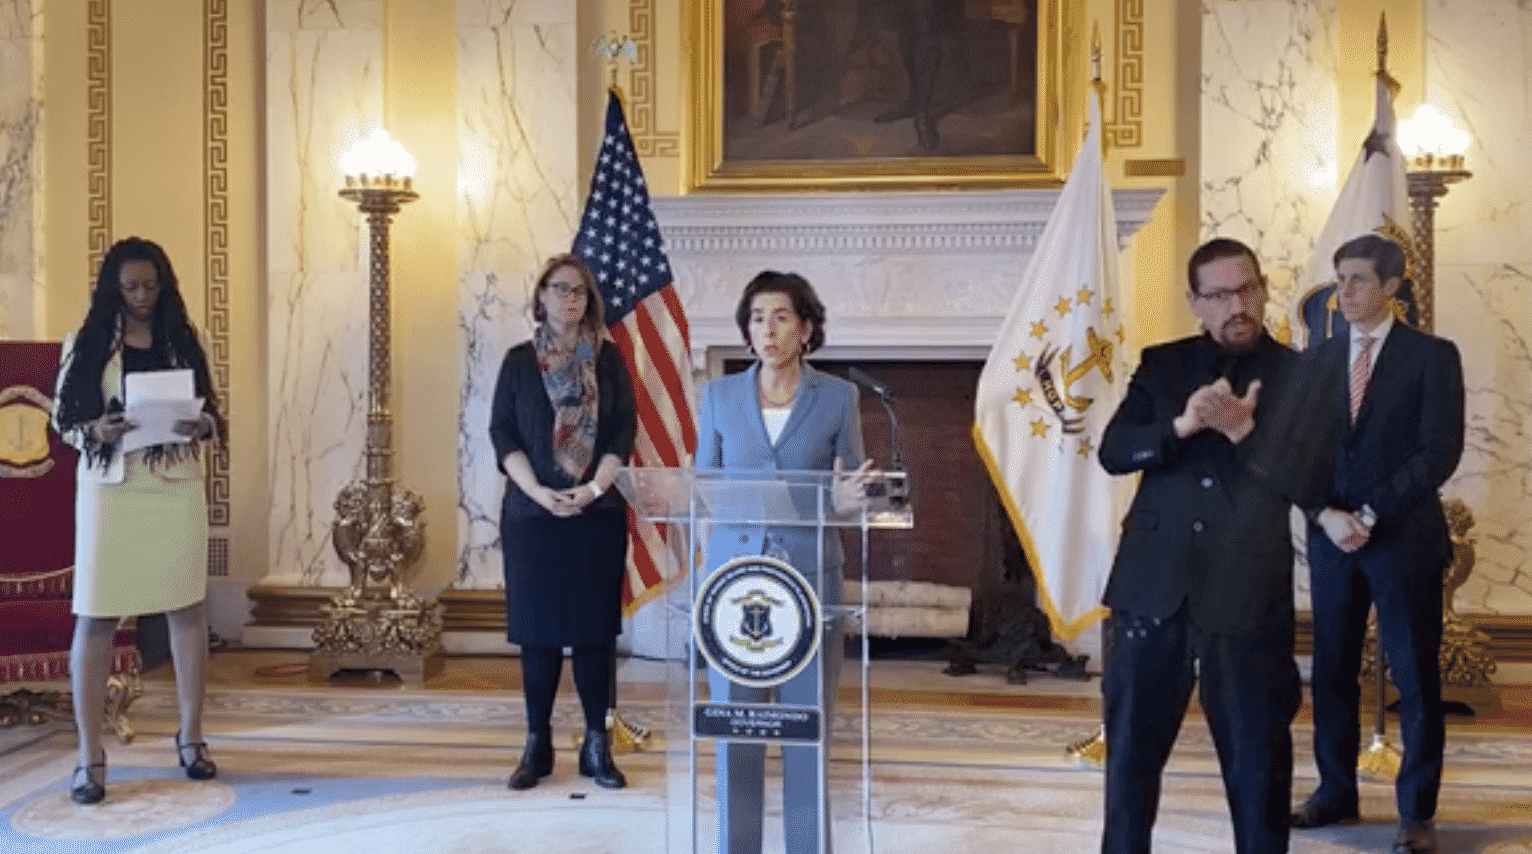 Gov. Gina Raimondo held a press conference March 24 updating the public about steps taken to limit spread of COVID-19.